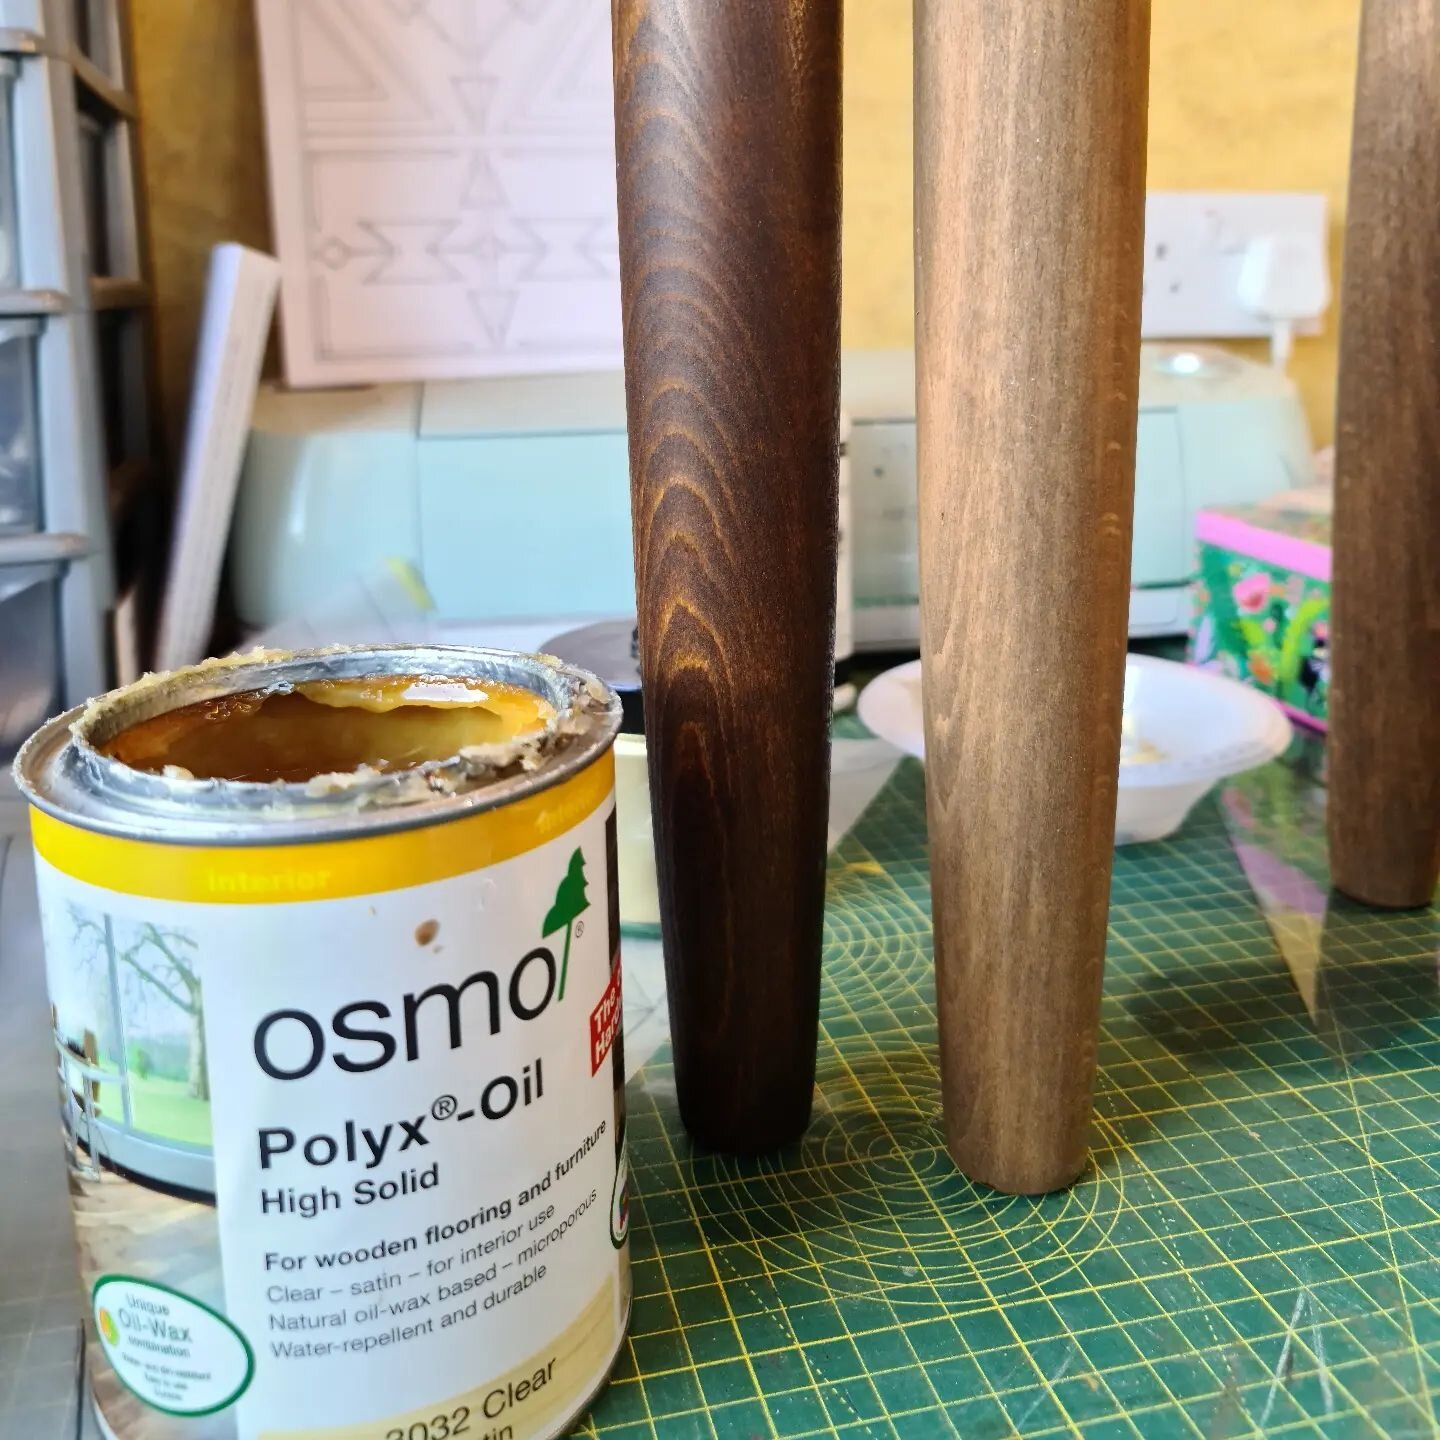 And this, Ladies and Gentlemen, is why @osmo_uk is THE BUSINESS! 🤩 Look at that GRAIN! 😍 Look at that depth of COLOUR! 🤤 This little refurb is almost ready to head back home 👌💖 

#osmooil #oiling #solidoak #lovelylegs #furniturerefurbished #midc